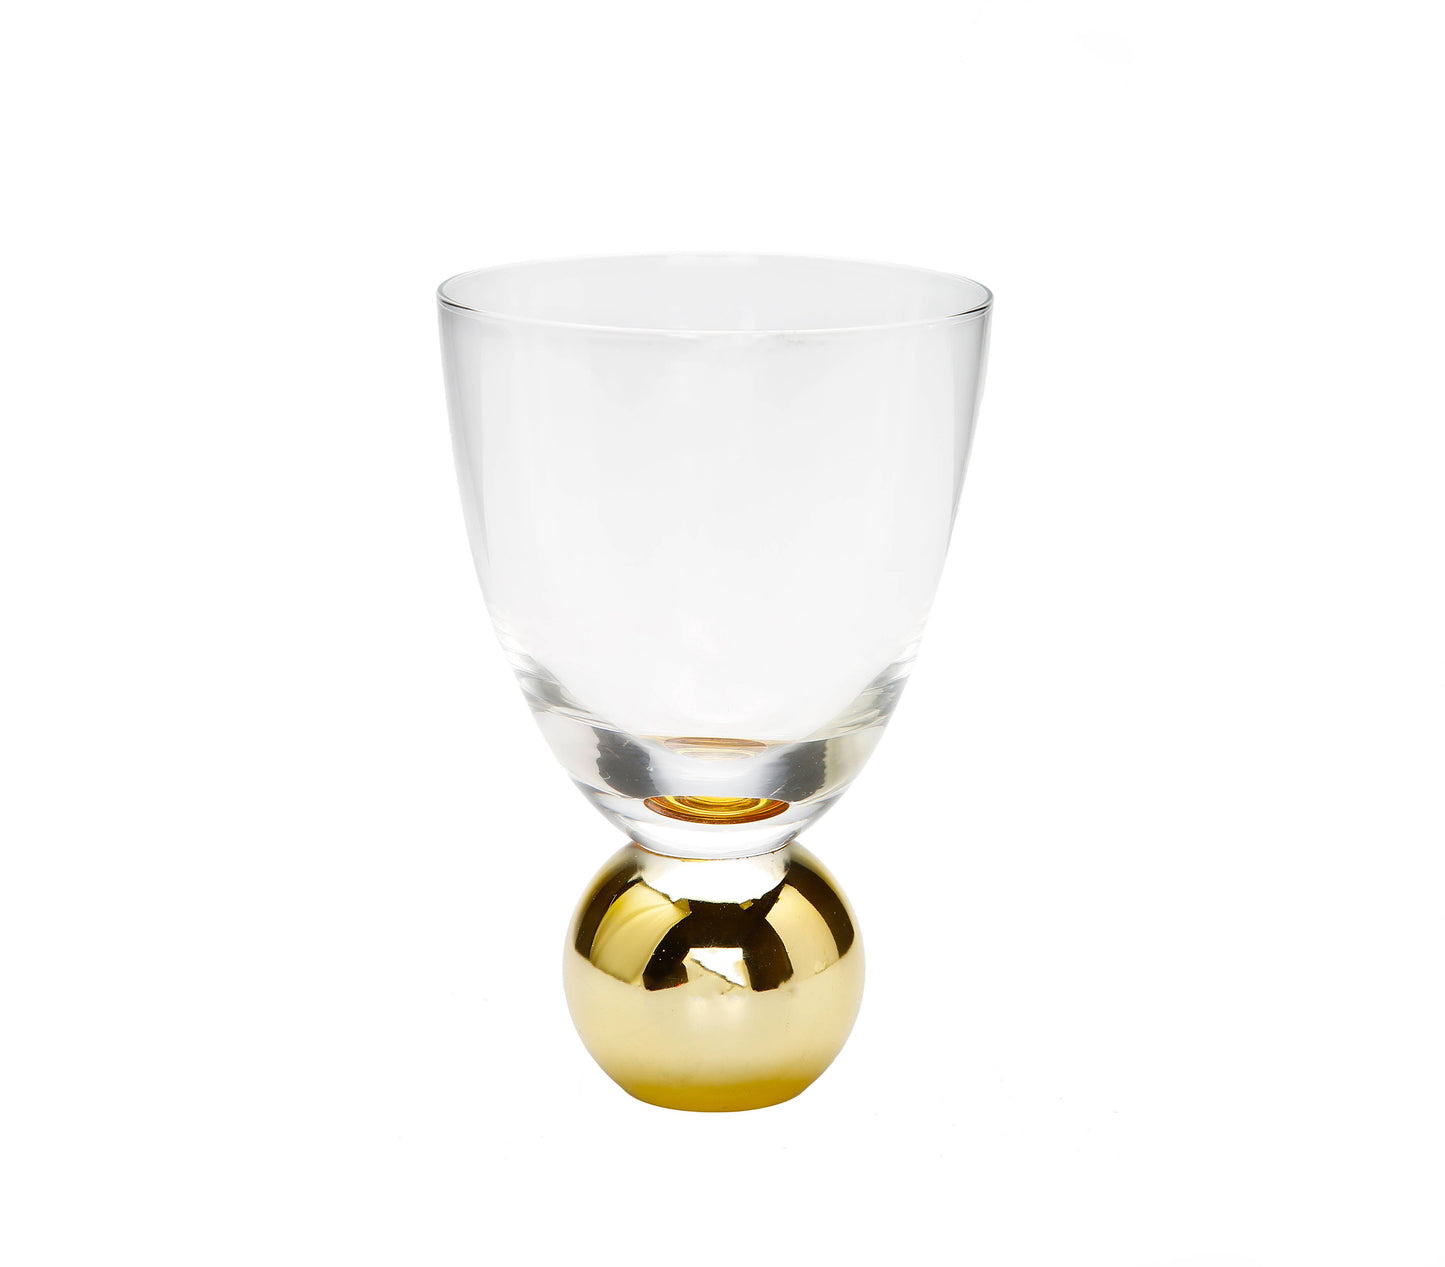 Set of 6 Small Wine Glasses on Gold Ball Pedestal